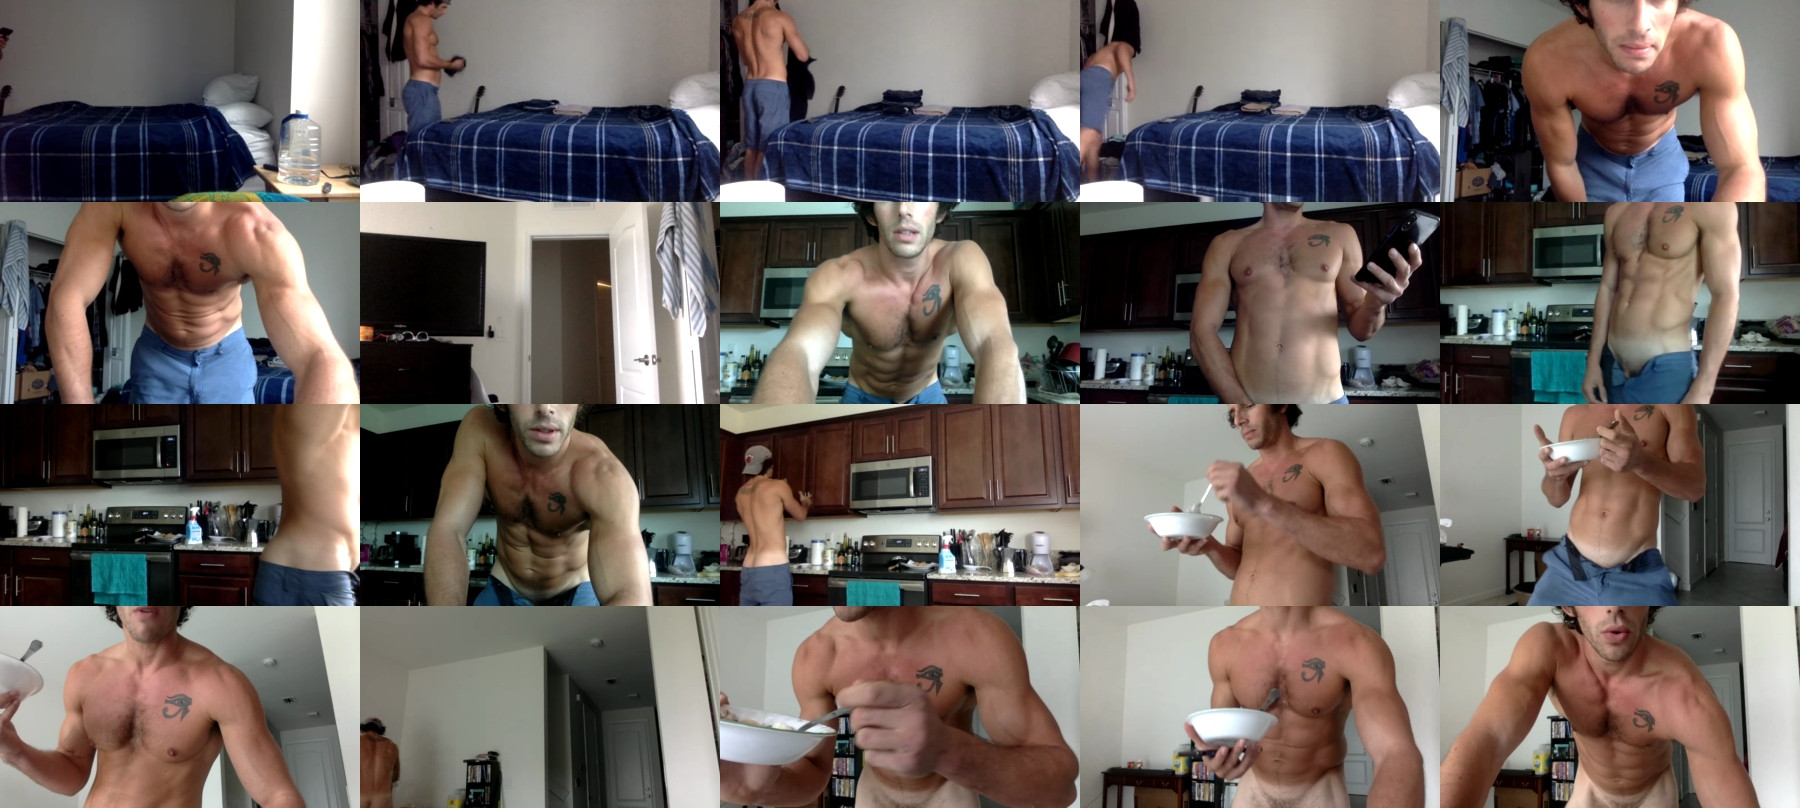 Naughtyandnice192  04-06-2021 Male Topless